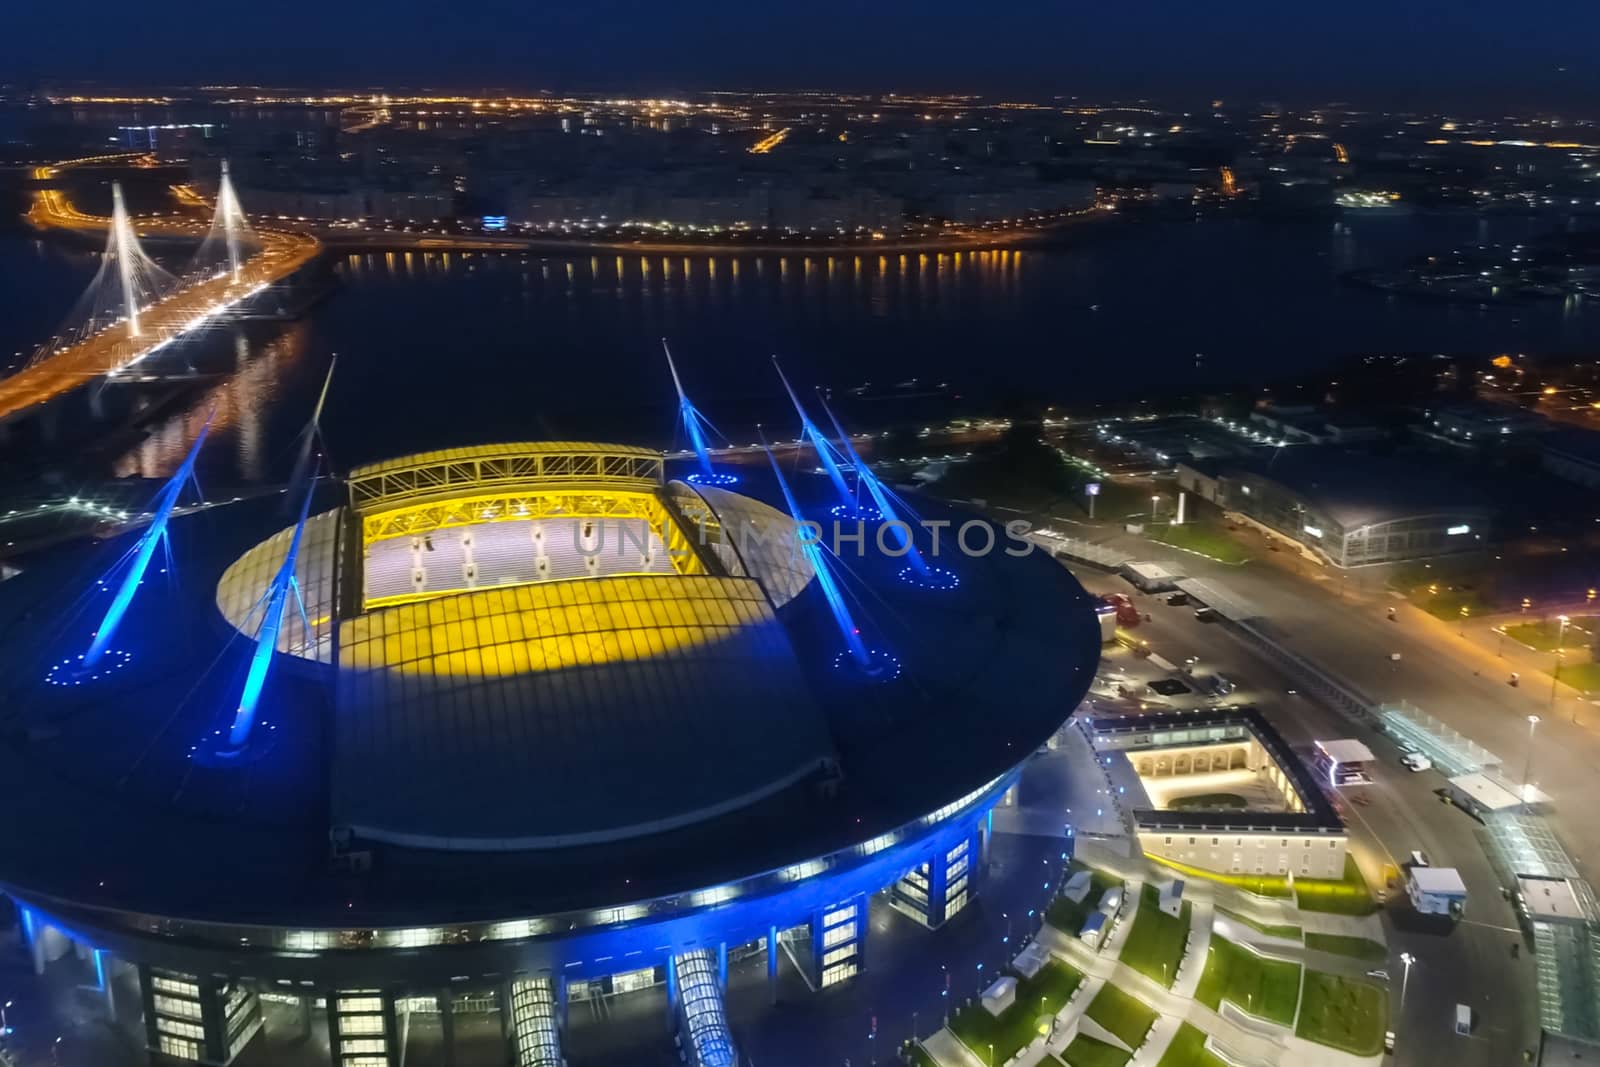 Moscow, Russia - May 11, 2017: Stadium Zenith Arena at night. Illuminated by multi-colored lights the stadium at night